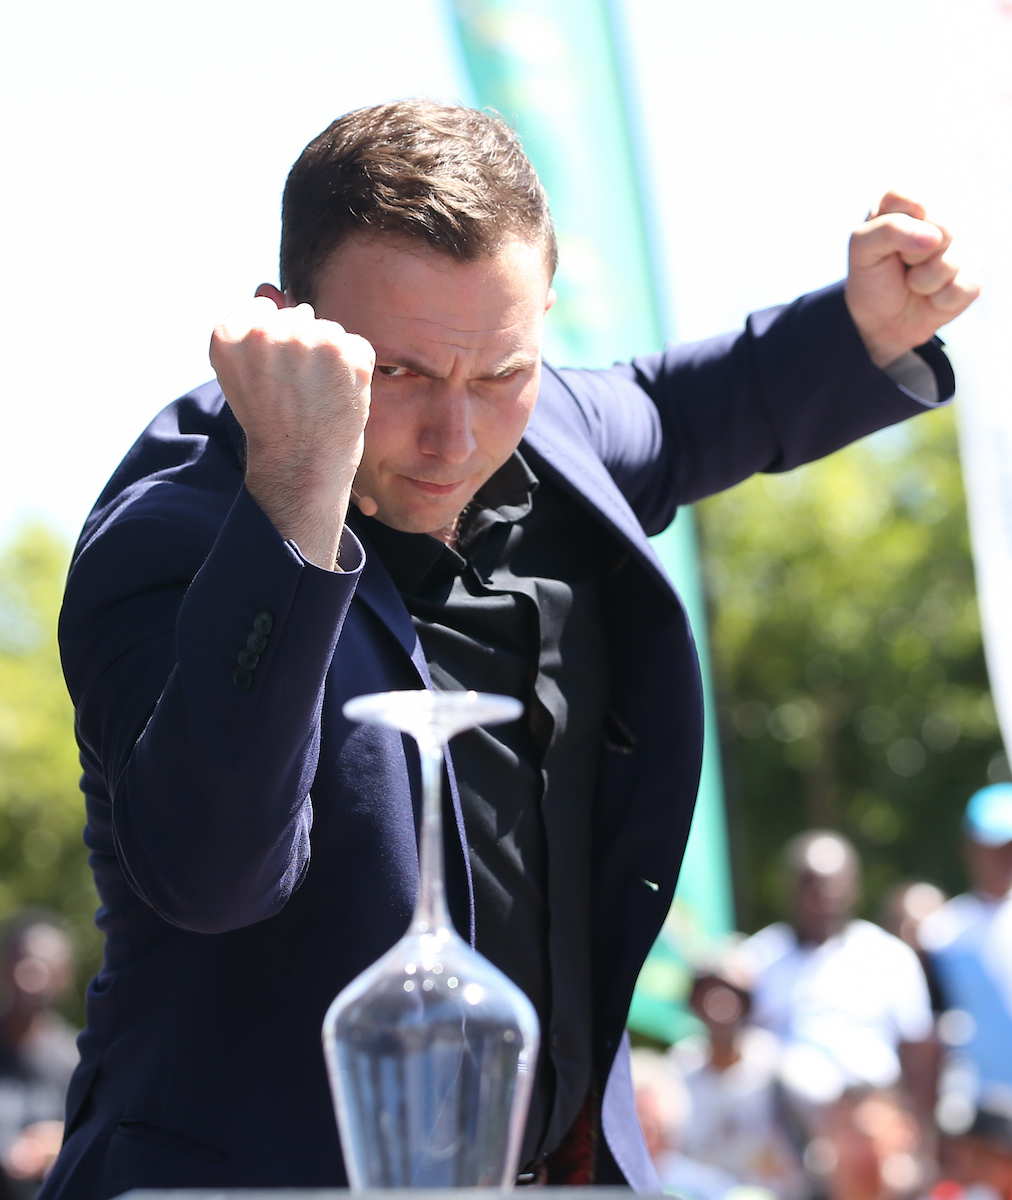 CAPE TOWN, SOUTH AFRICA - 7 December 2016, Larry Soffer performs his magic tricks during the Springbok 7's signing session at the V&A Waterfront ahead of the HSBC Cape Town 7's rugby tournament taking place at Cape Town Stadium on 10-11 December 2016.  (Photo by Roger Sedres/ImageSA)